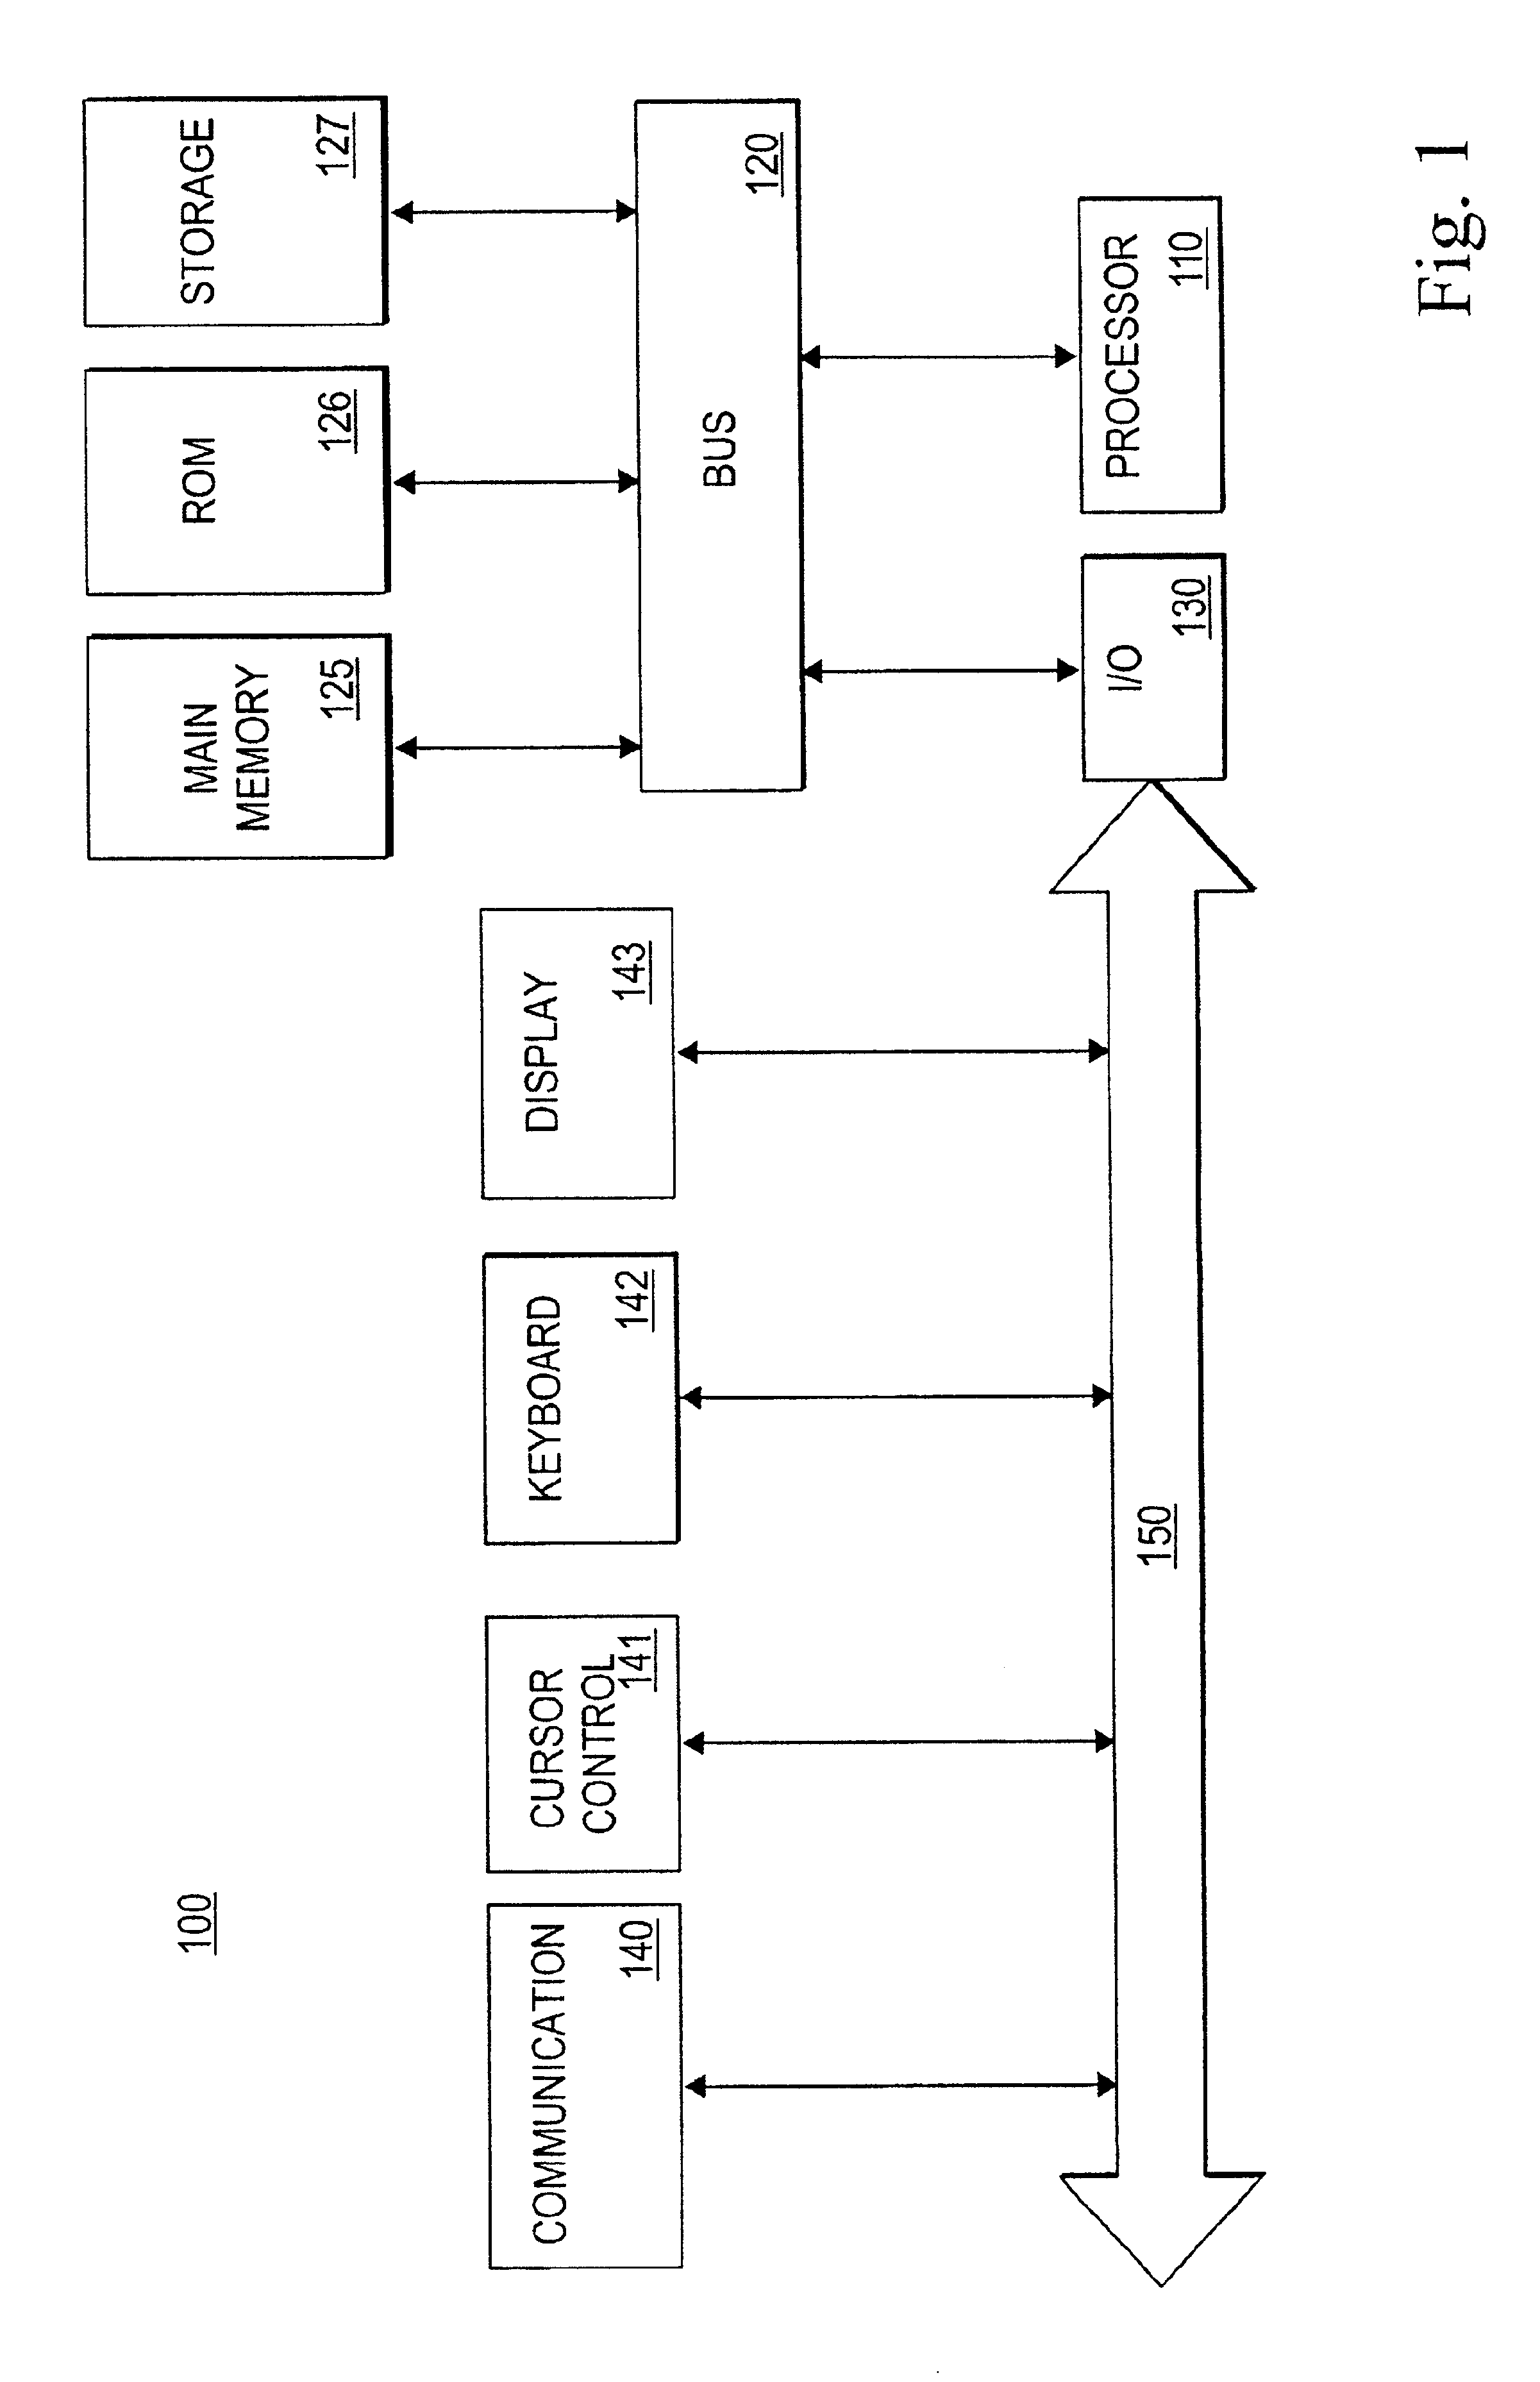 Method and system for bidirectional bitwise constant propogation by abstract interpretation